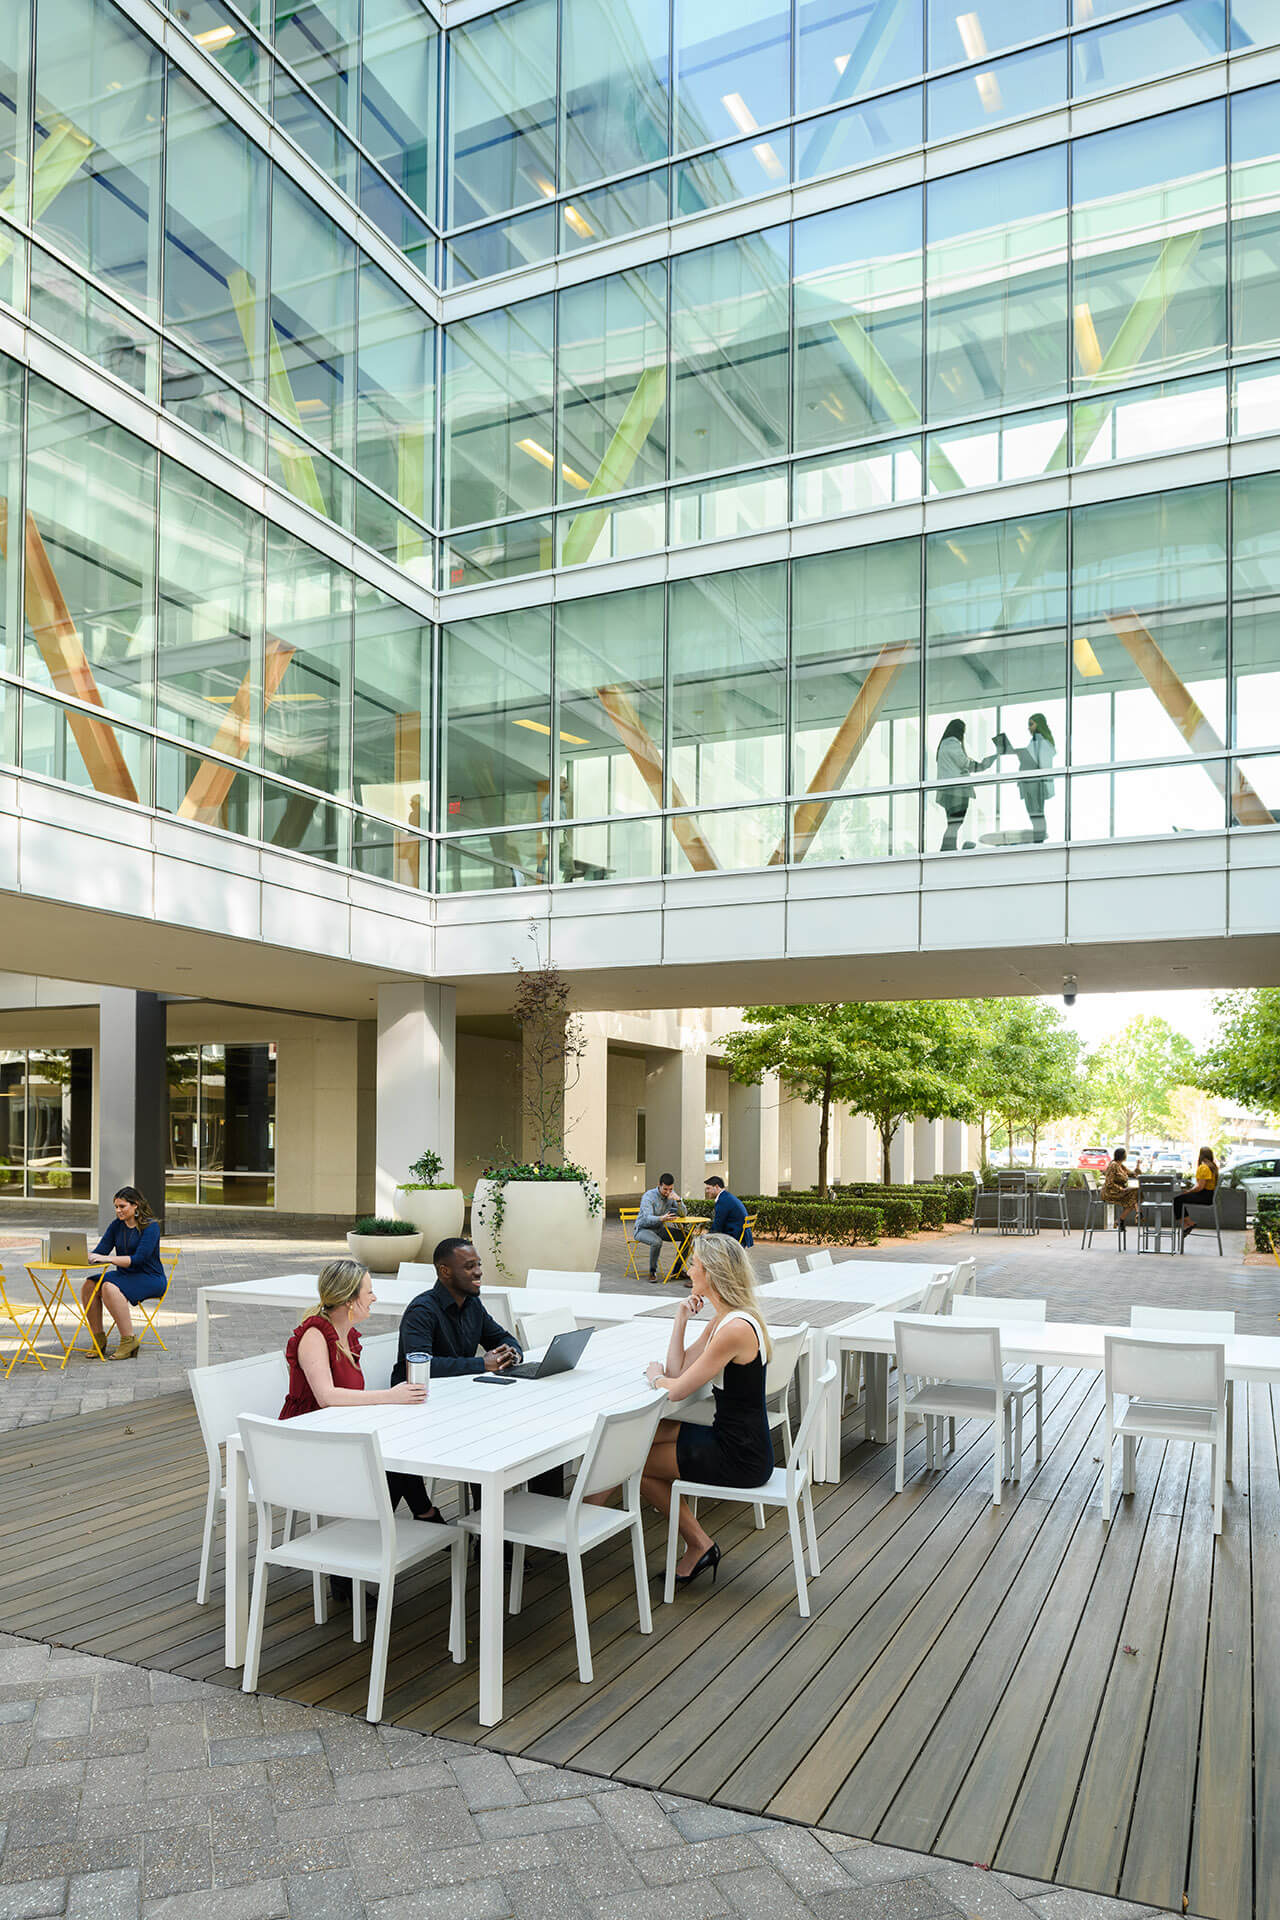 outdoor atrium area with business people sitting at tables and chairs at the terraces